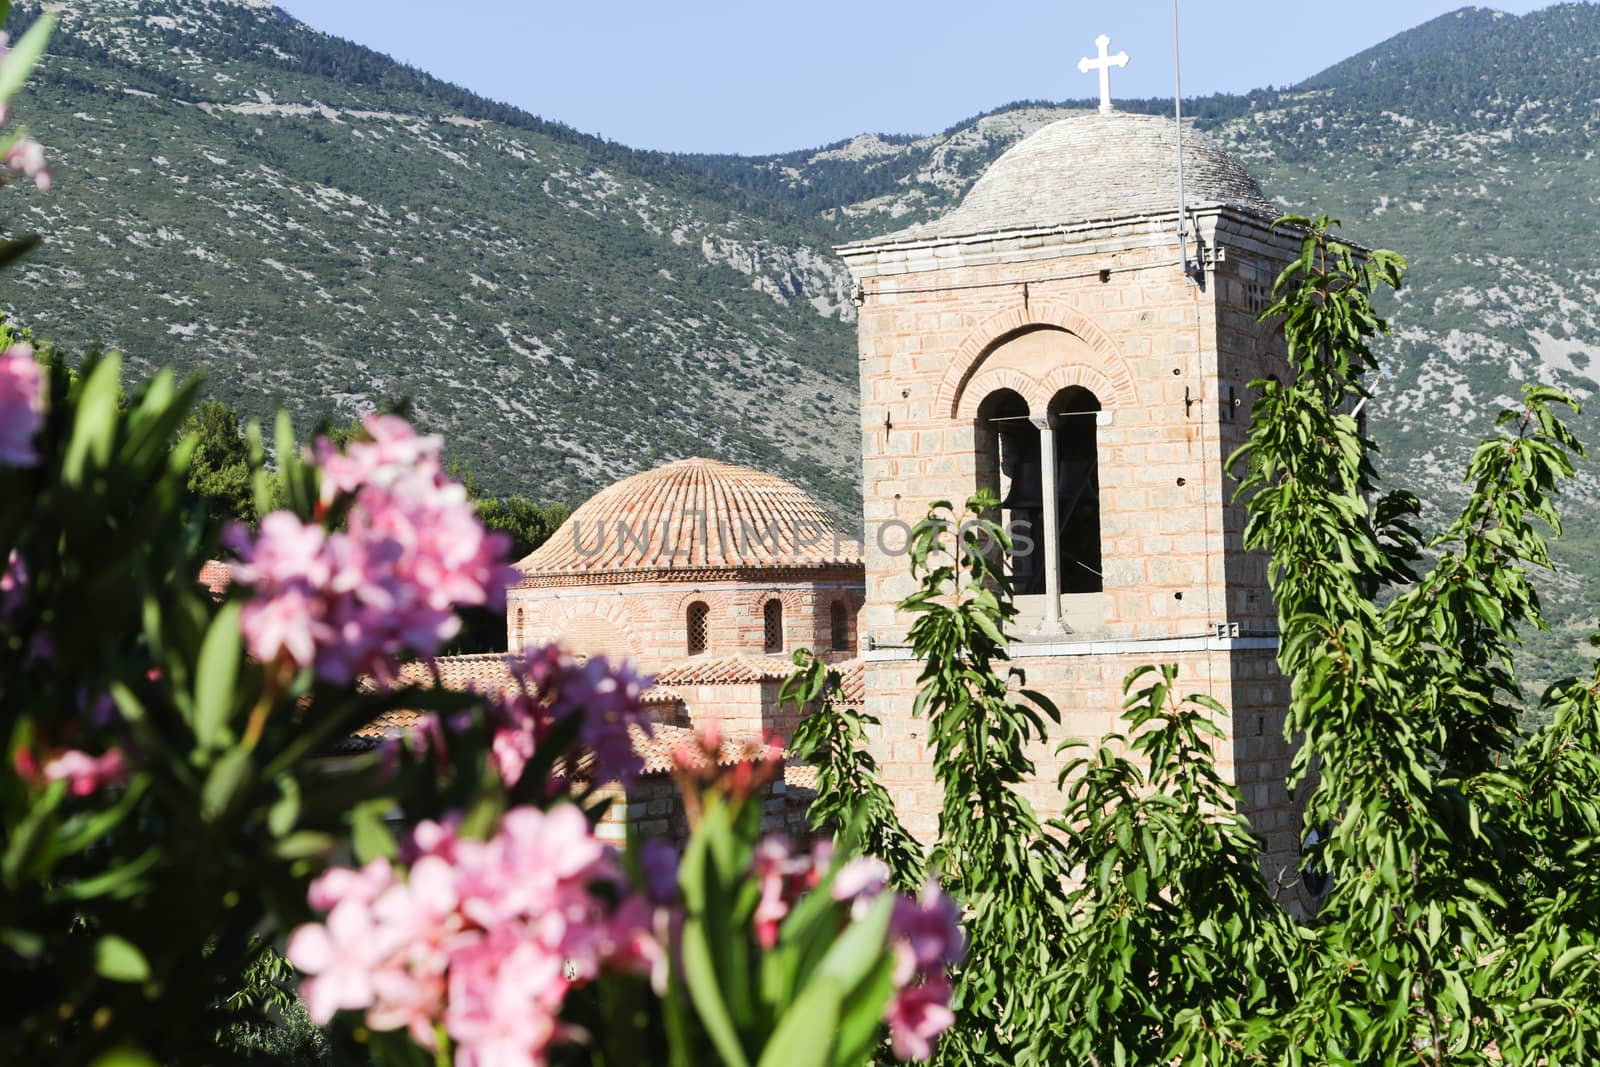 The famous byzantine monastery of Hosios Loukas in Central Greece